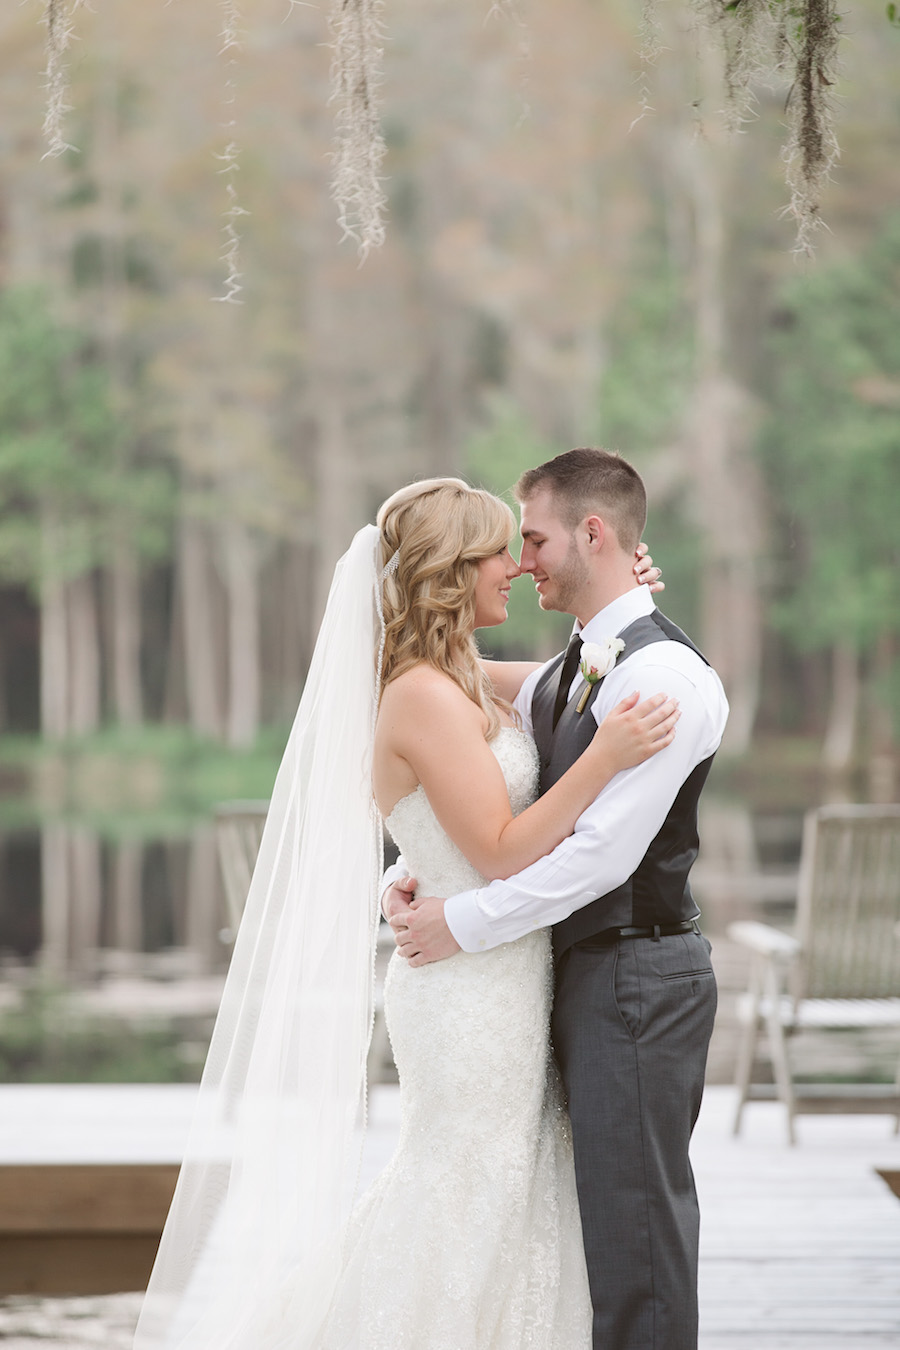 Outdoor Rustic Lakeside Bride and Groom Wedding Portrait | Allure Couture Ivory Lace Trumpet Wedding Gown with Cathedral Veil